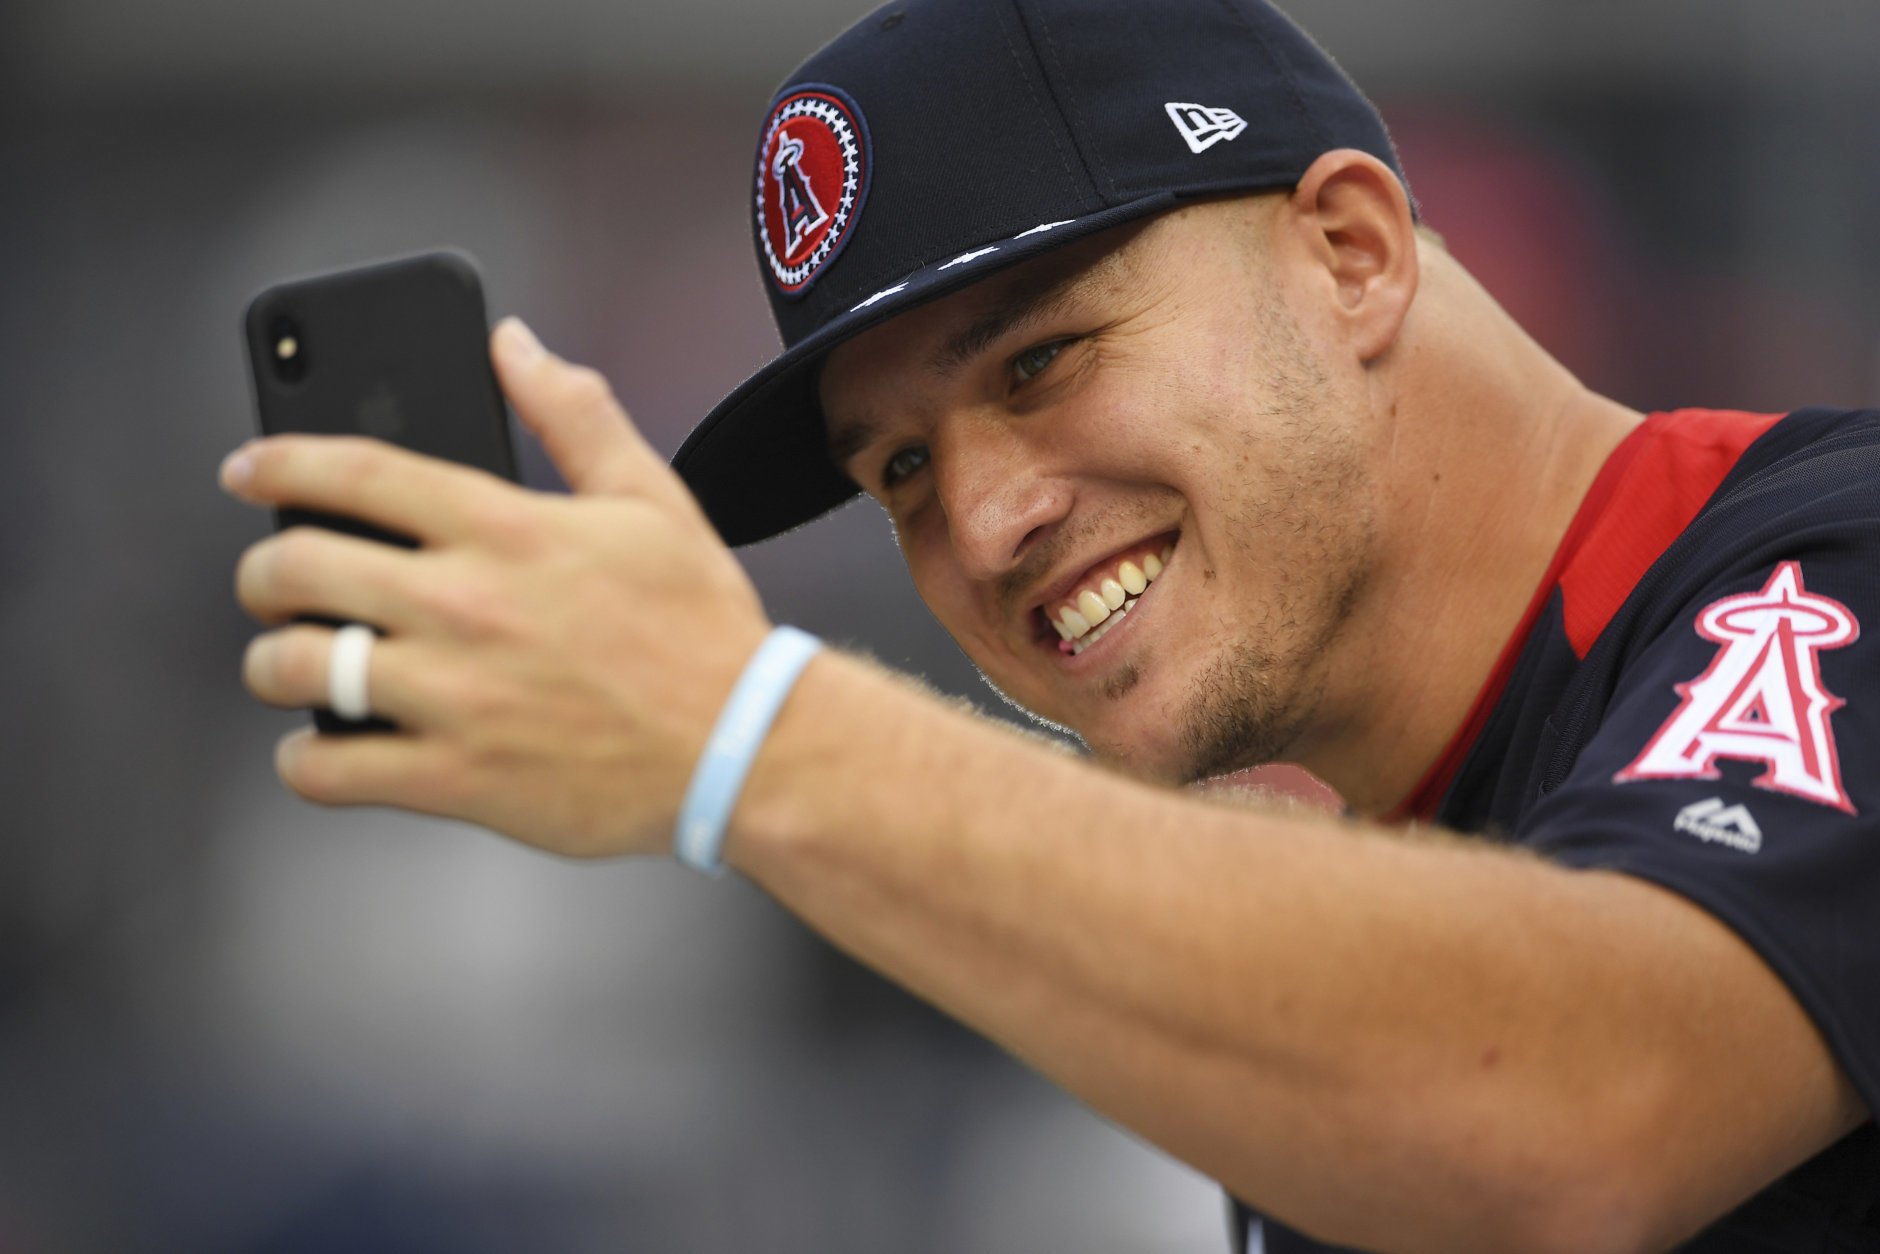 American League, Los Angeles Angels outfielder Mike Trout takes a photo on the field ahead of the All-Star Home Run Derby Baseball event, Monday, July 16, 2018, at Nationals Park, in Washington. The 89th MLB baseball All-Star Game will be played Tuesday. (AP Photo/Patrick Semansky)